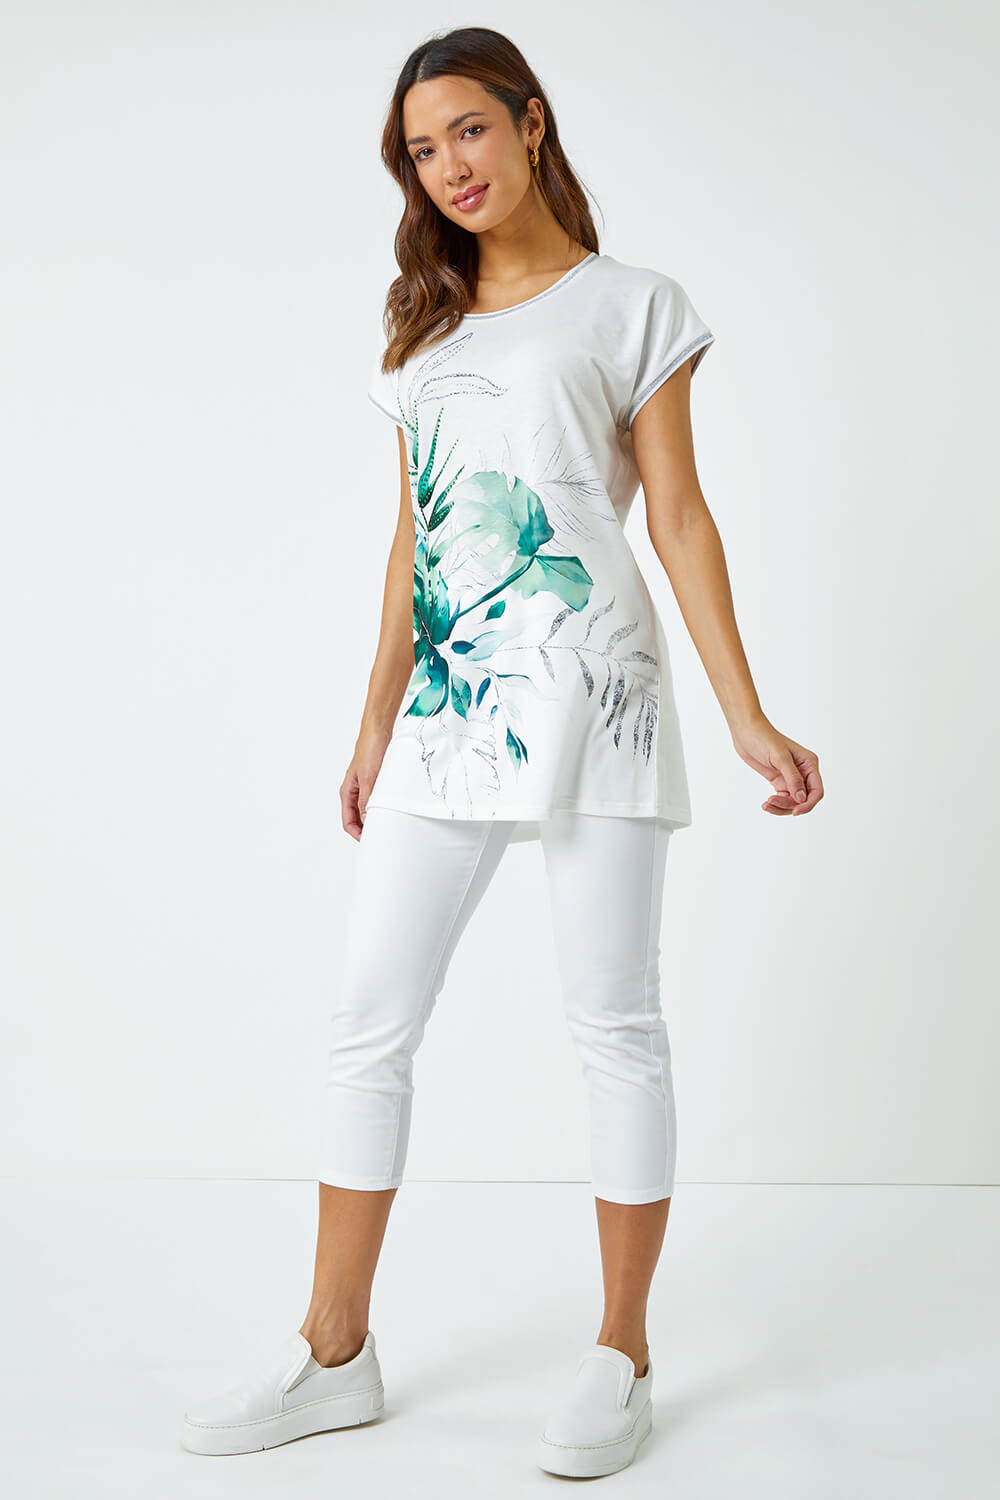 Green Palm Print Embellished Tunic Top, Image 2 of 5